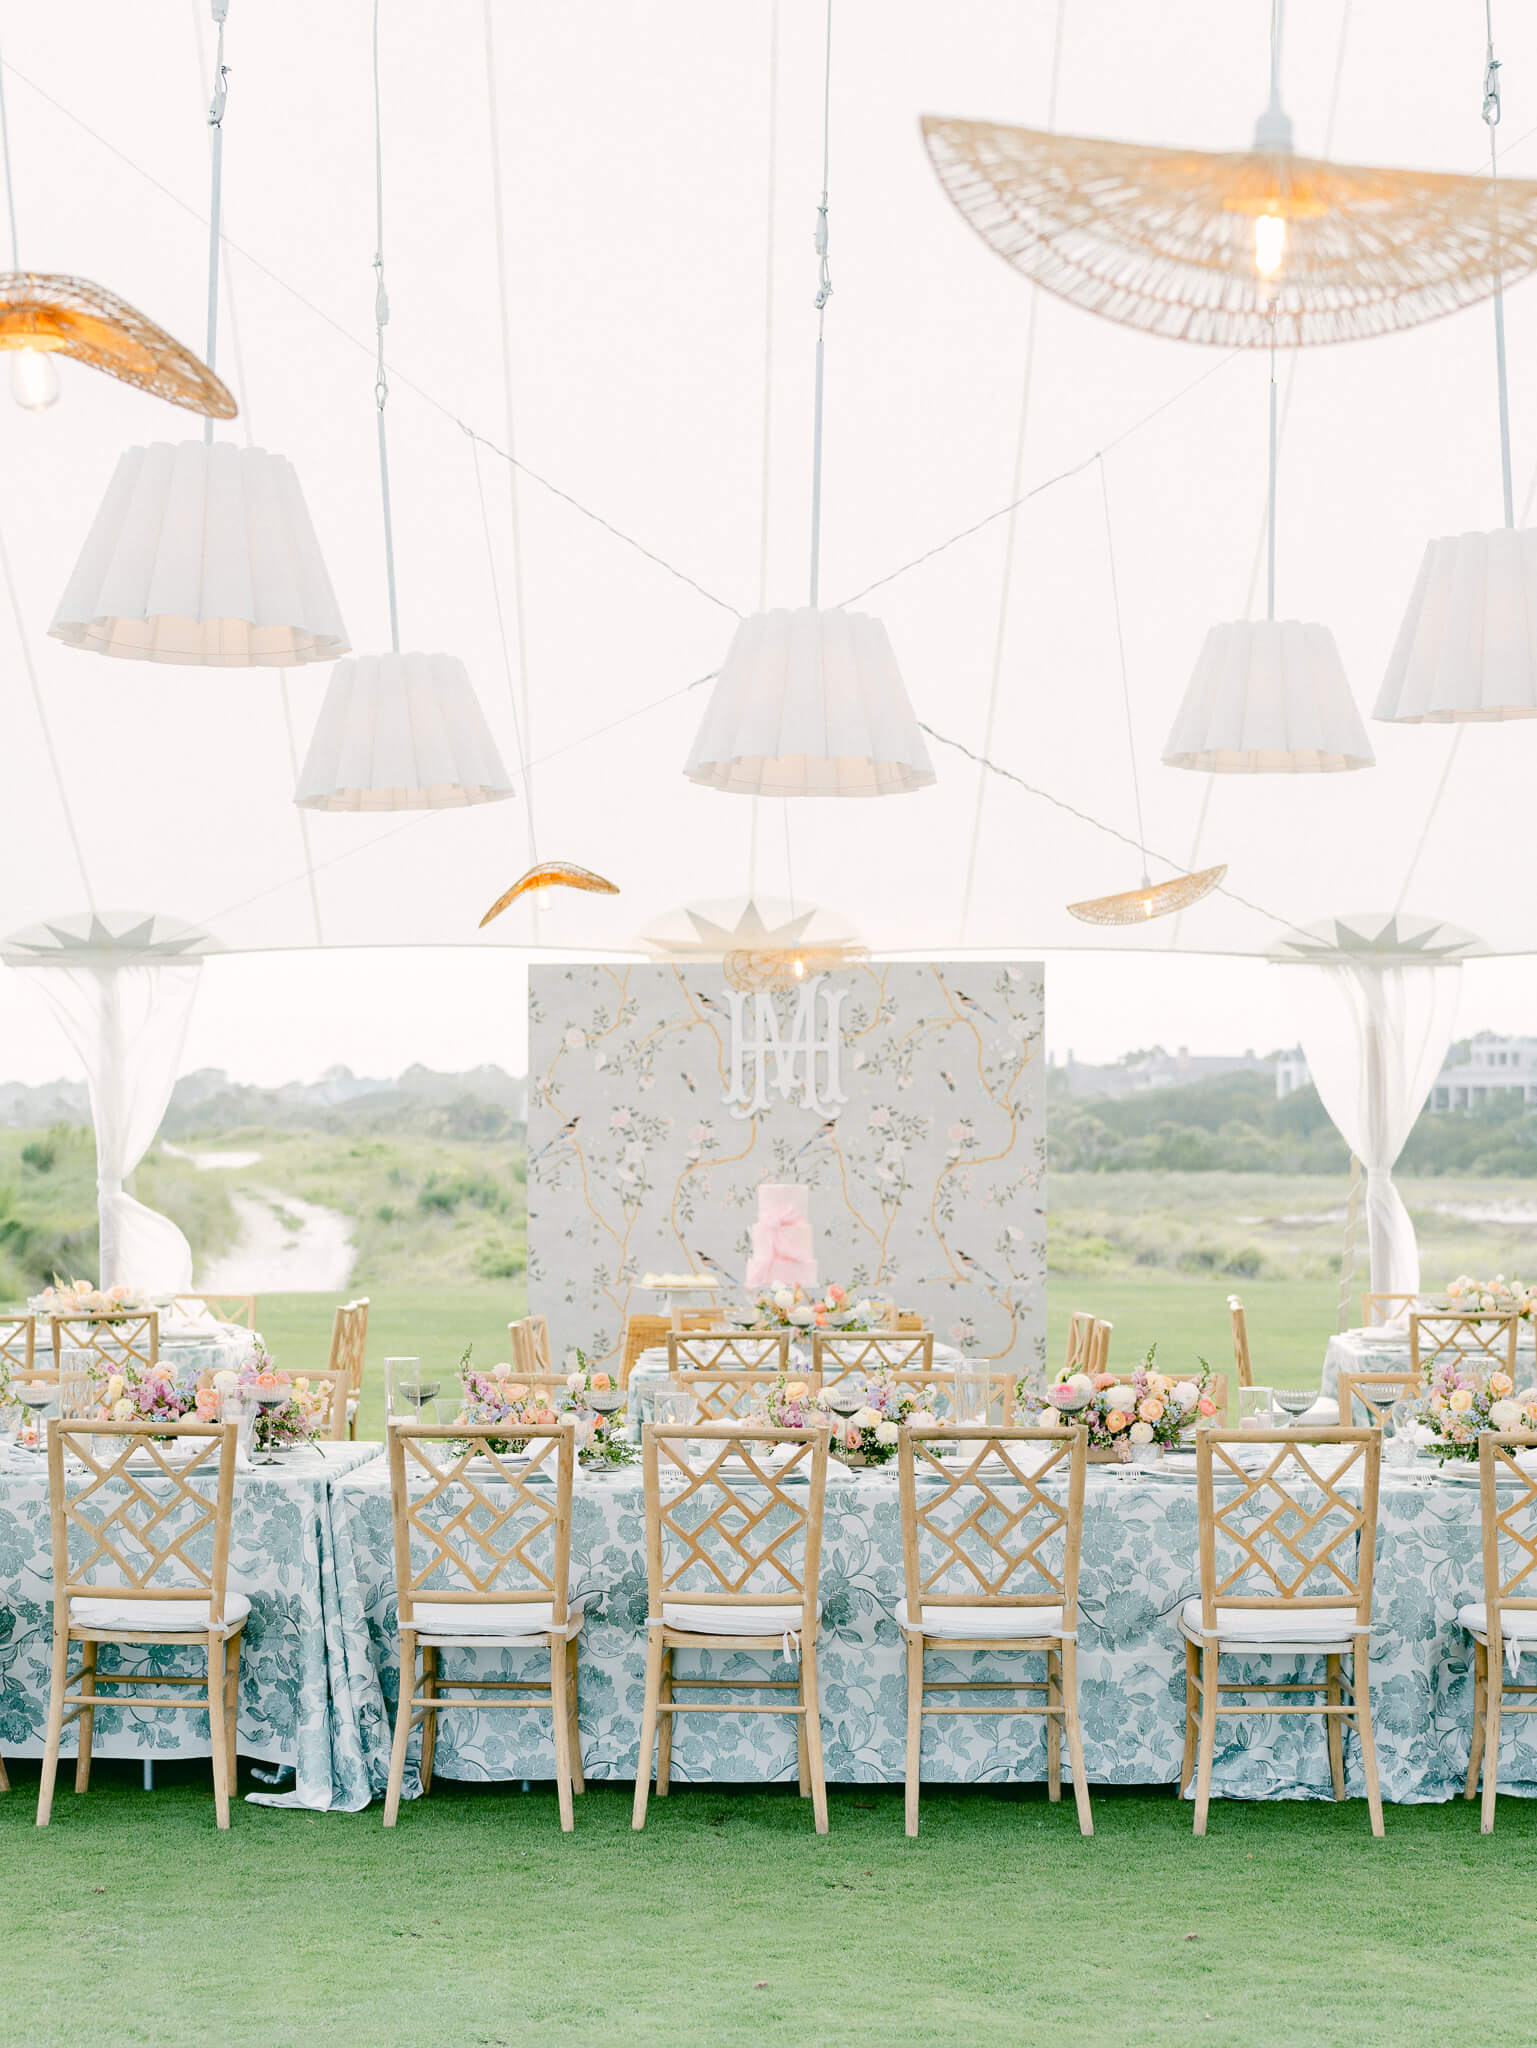 A long reception table with a blue tablecloth and chairs under a sail cloth tent with lamps hanging from above.